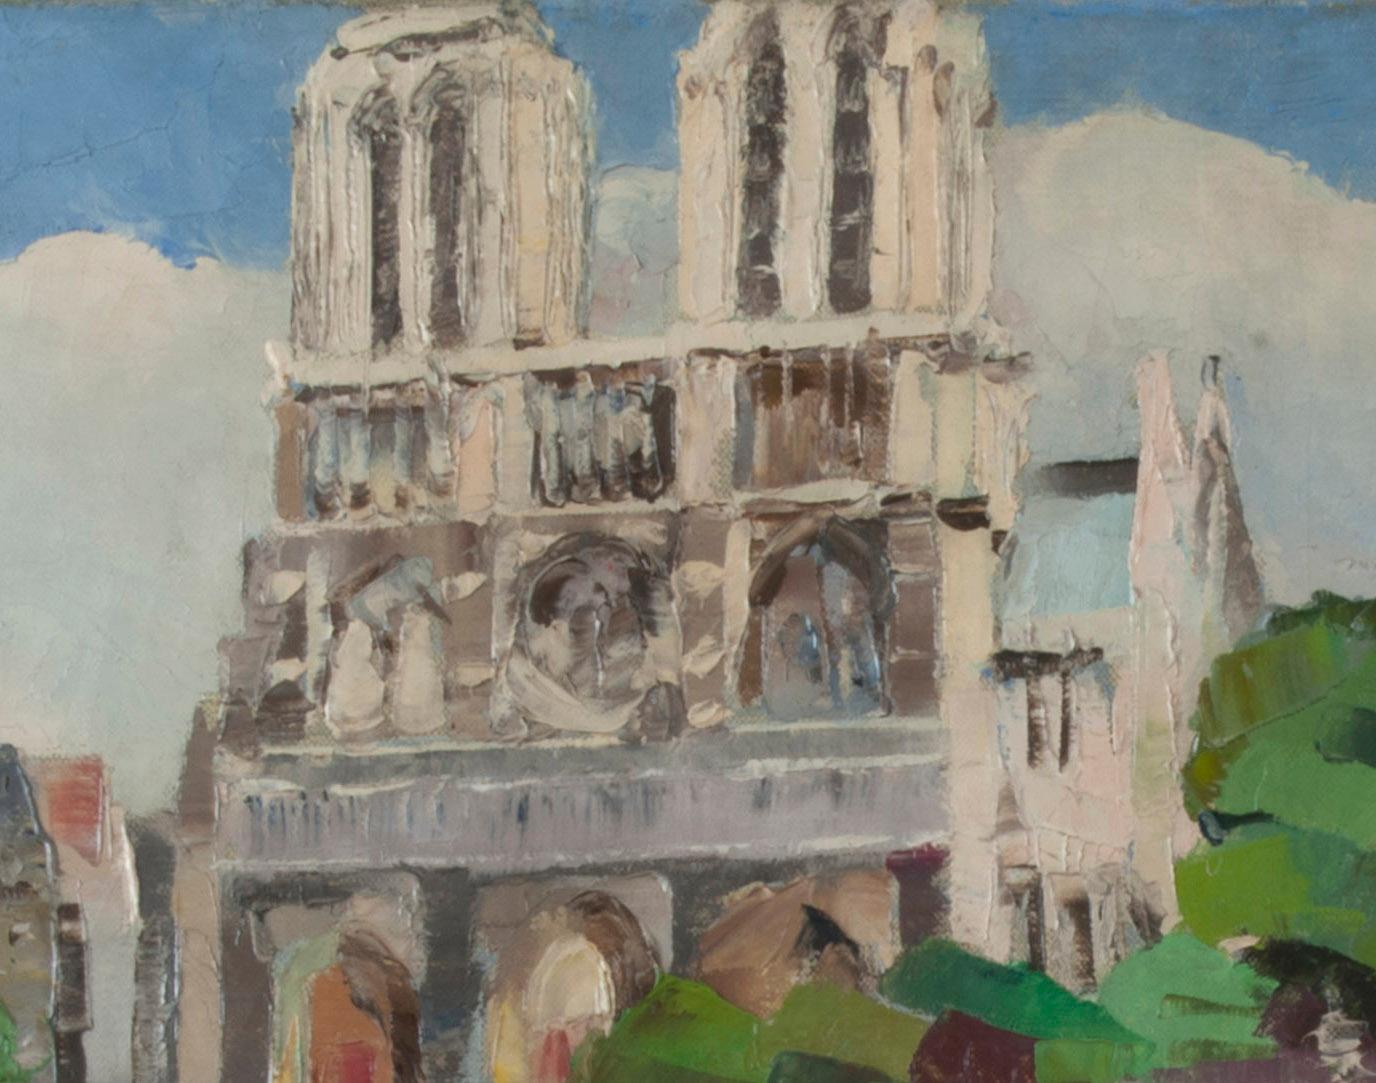 Long Light Notre Dame - Painting by Robert Hallowell